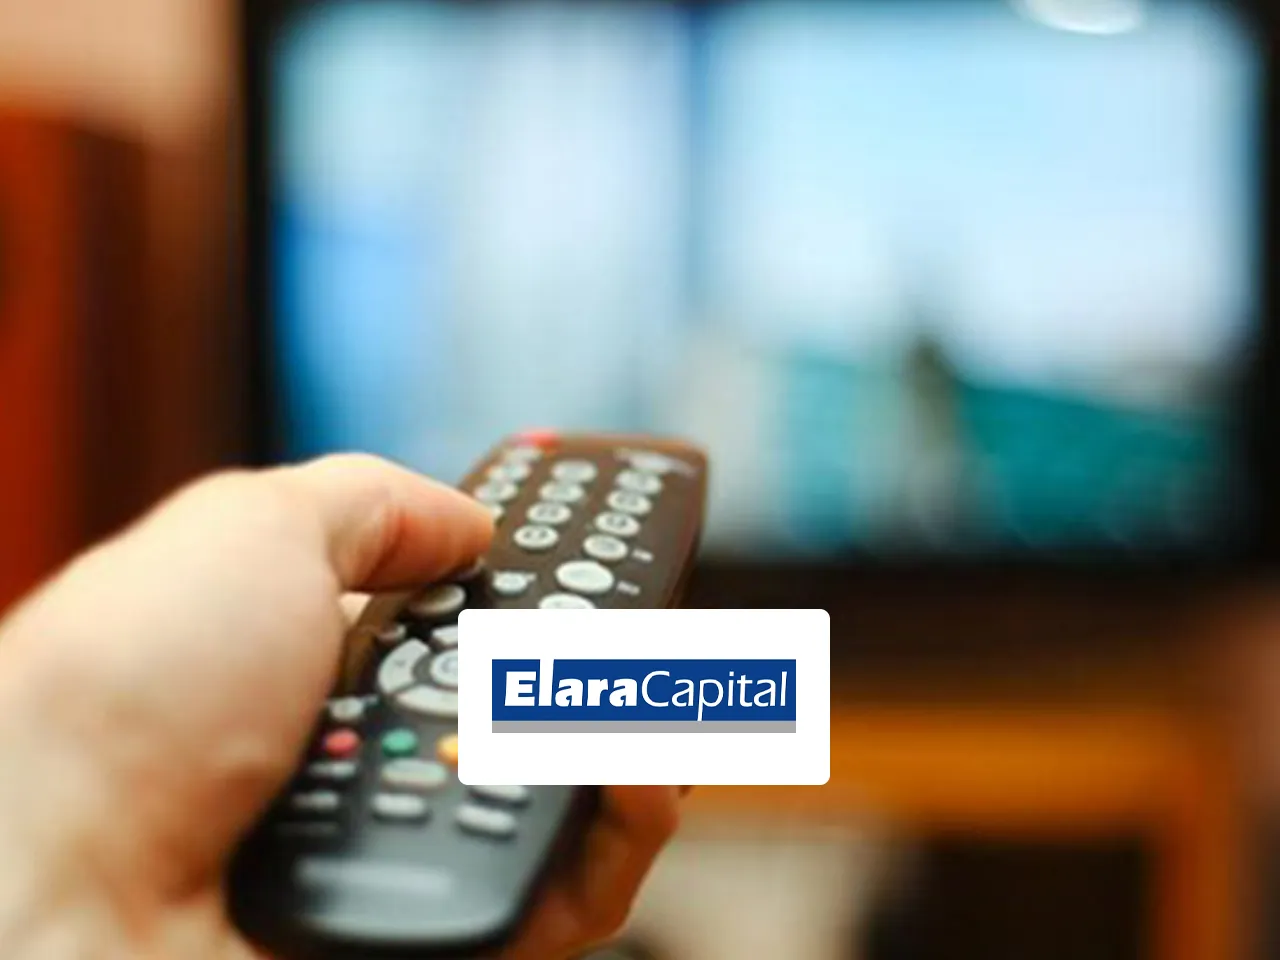 TV industry faced muted growth in advertising in Q3: Elara Securities report